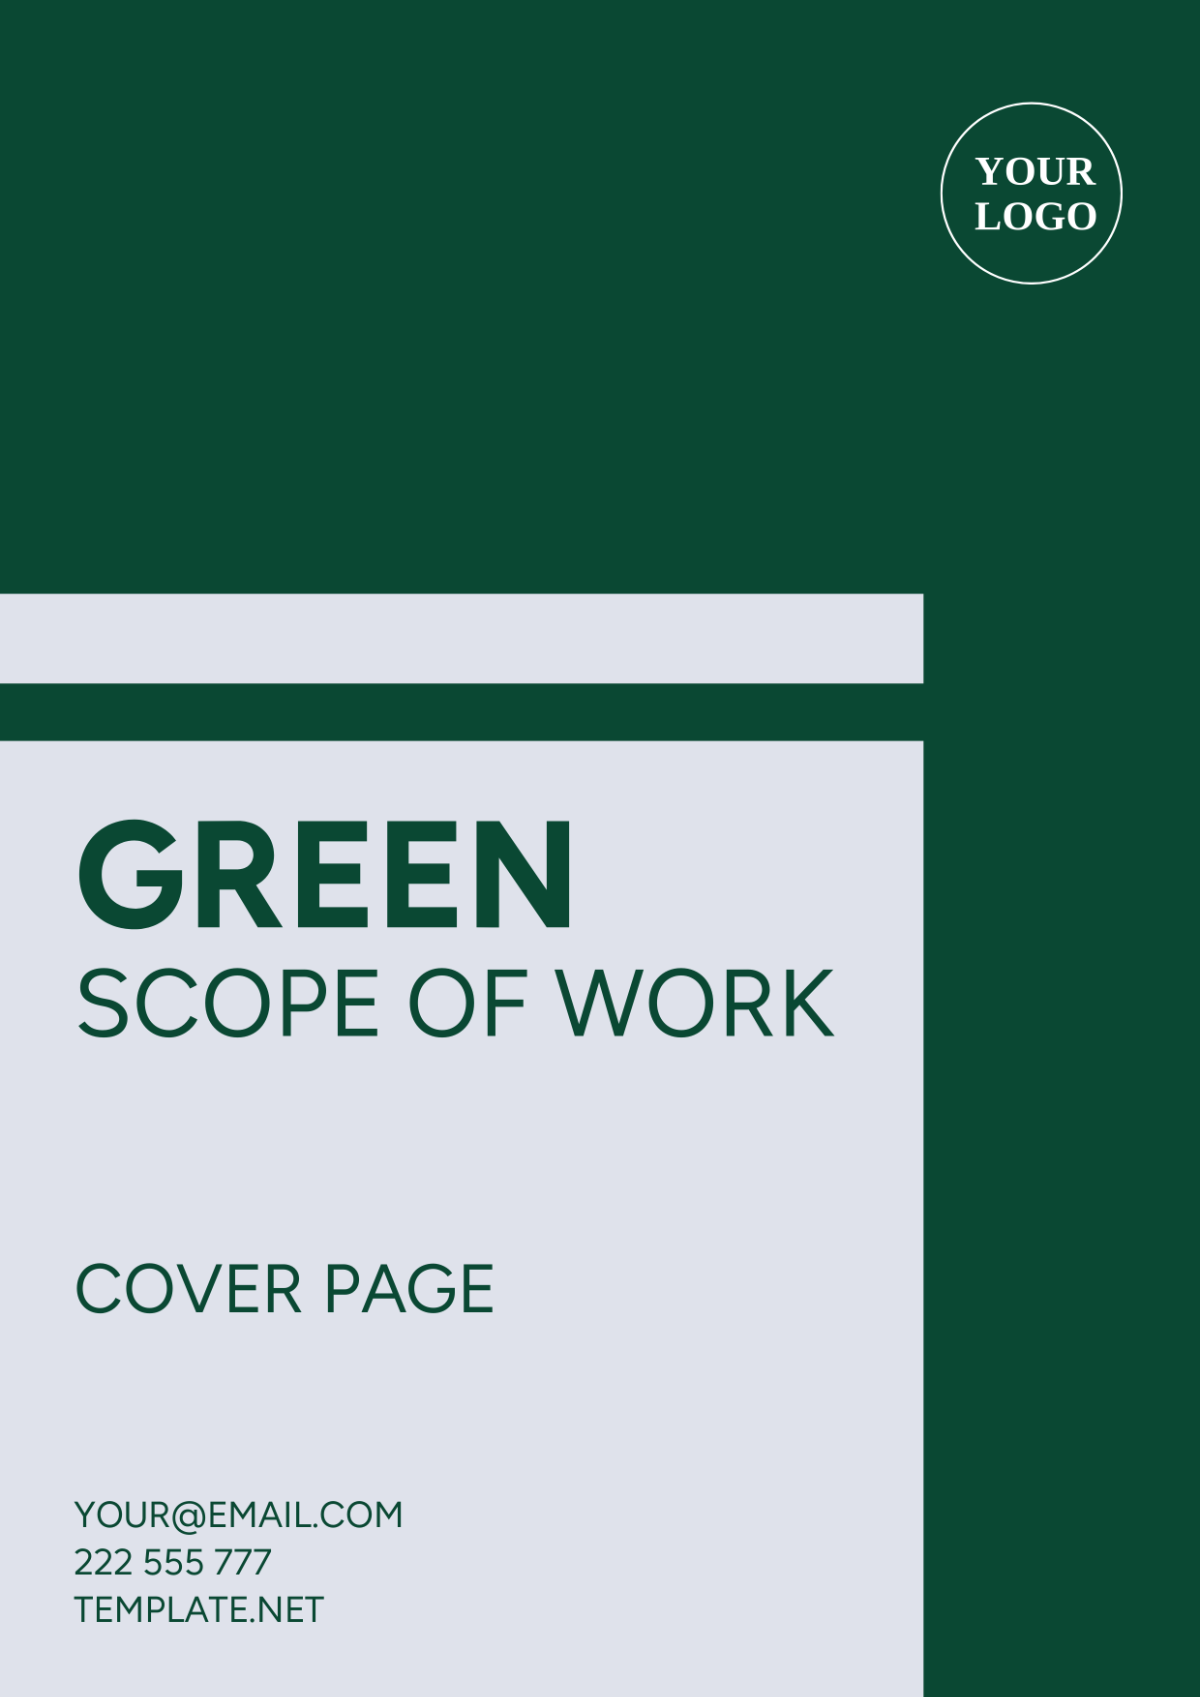 Green Scope of Work Cover Page